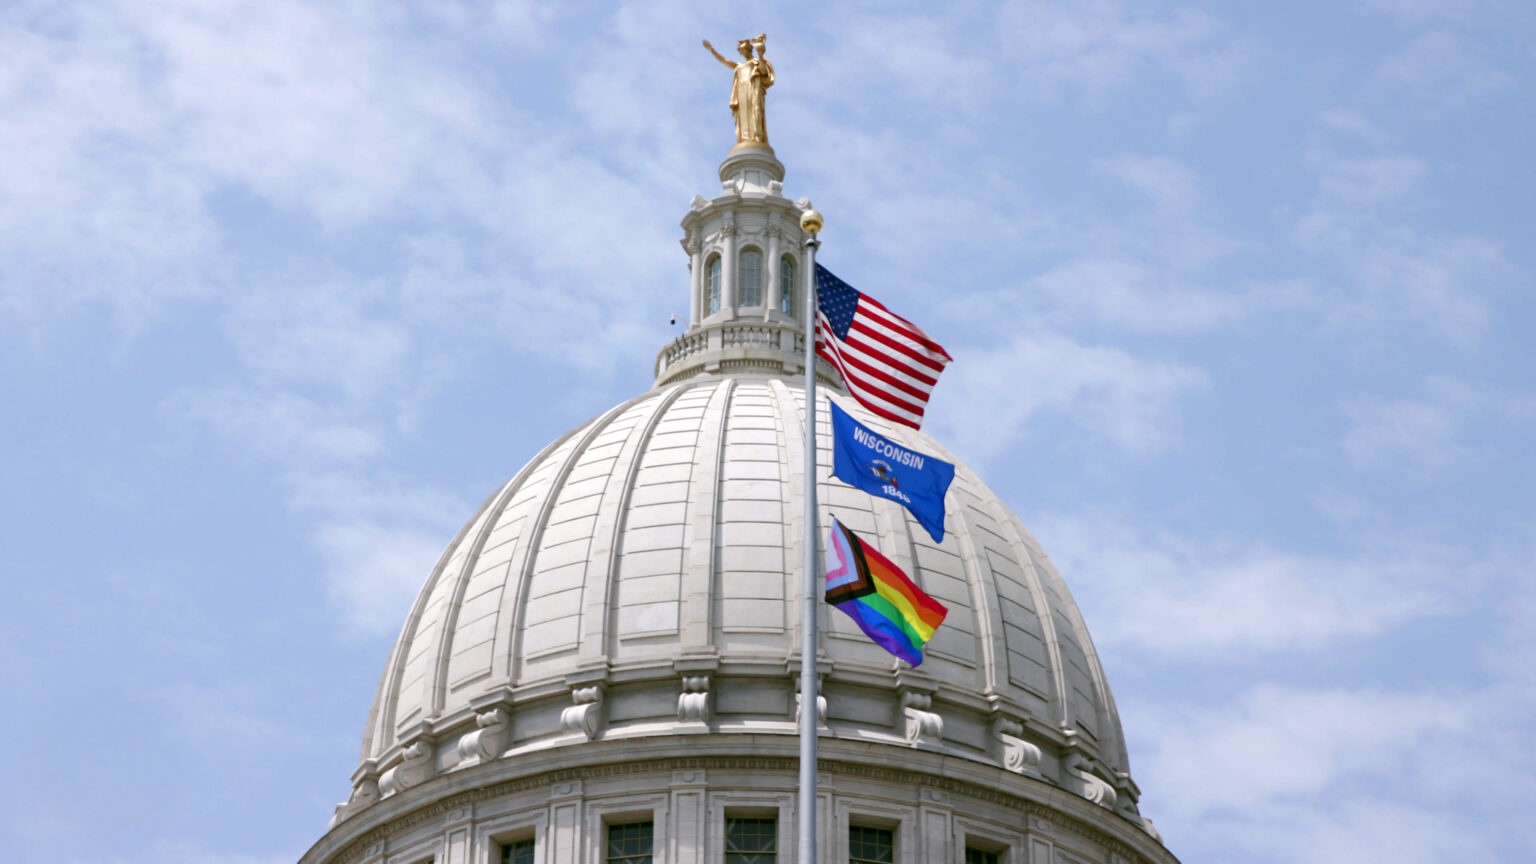 The U.S., Wisconsin, and Progress Pride flags wave in wind on a flagpole in front of the Wisconsin Capitol dome topped by a statue titled Wisconsin, with a partly cloudy sky in the background.